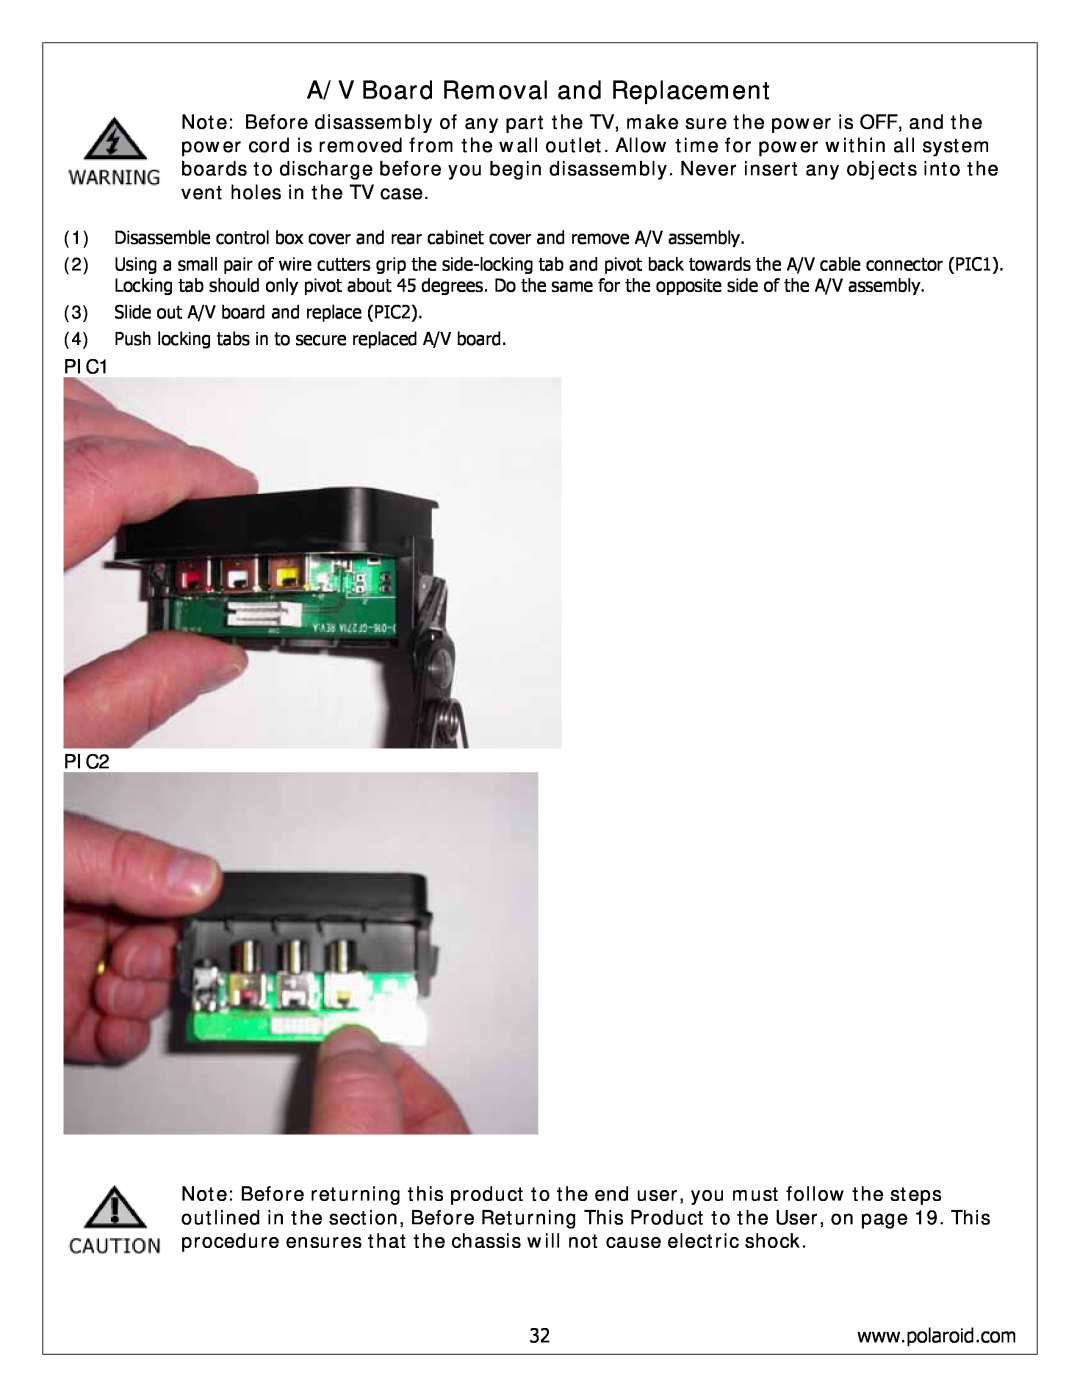 Polaroid FLM-4232HM, FLM-4034B, FLM-4234BH service manual A/V Board Removal and Replacement 